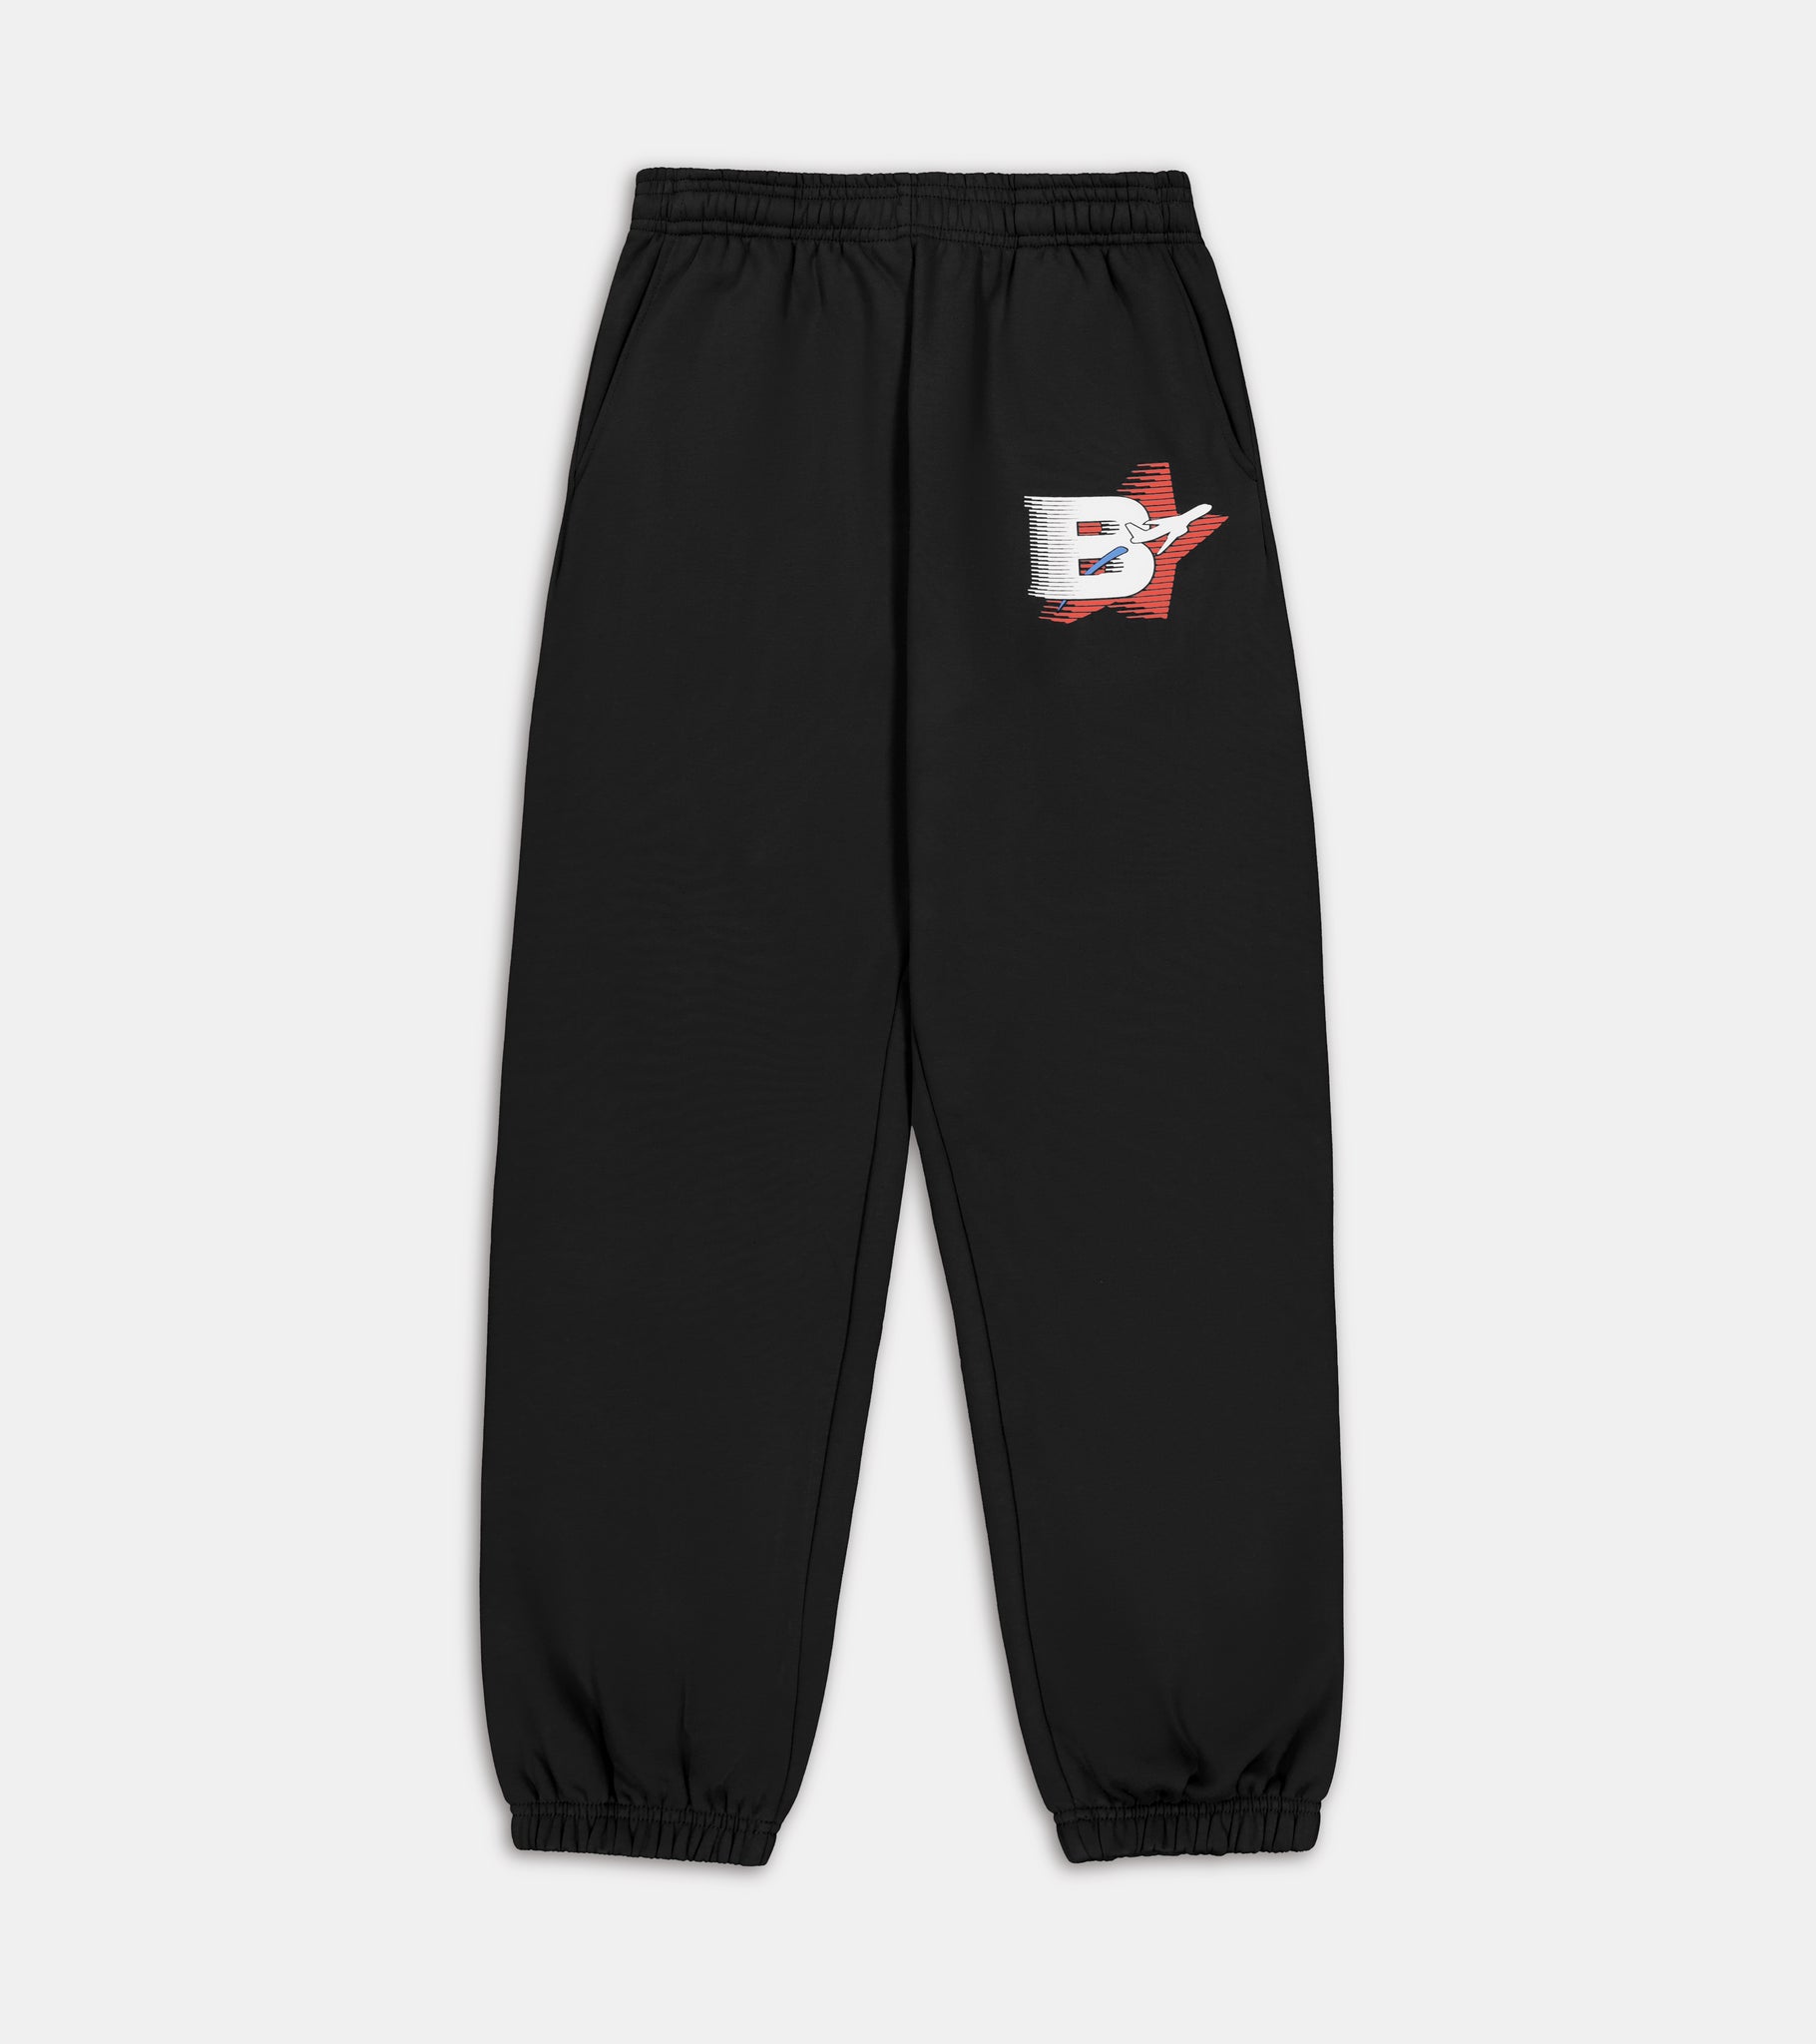 Frequent Flyer Cuffed Sweatpants - Black